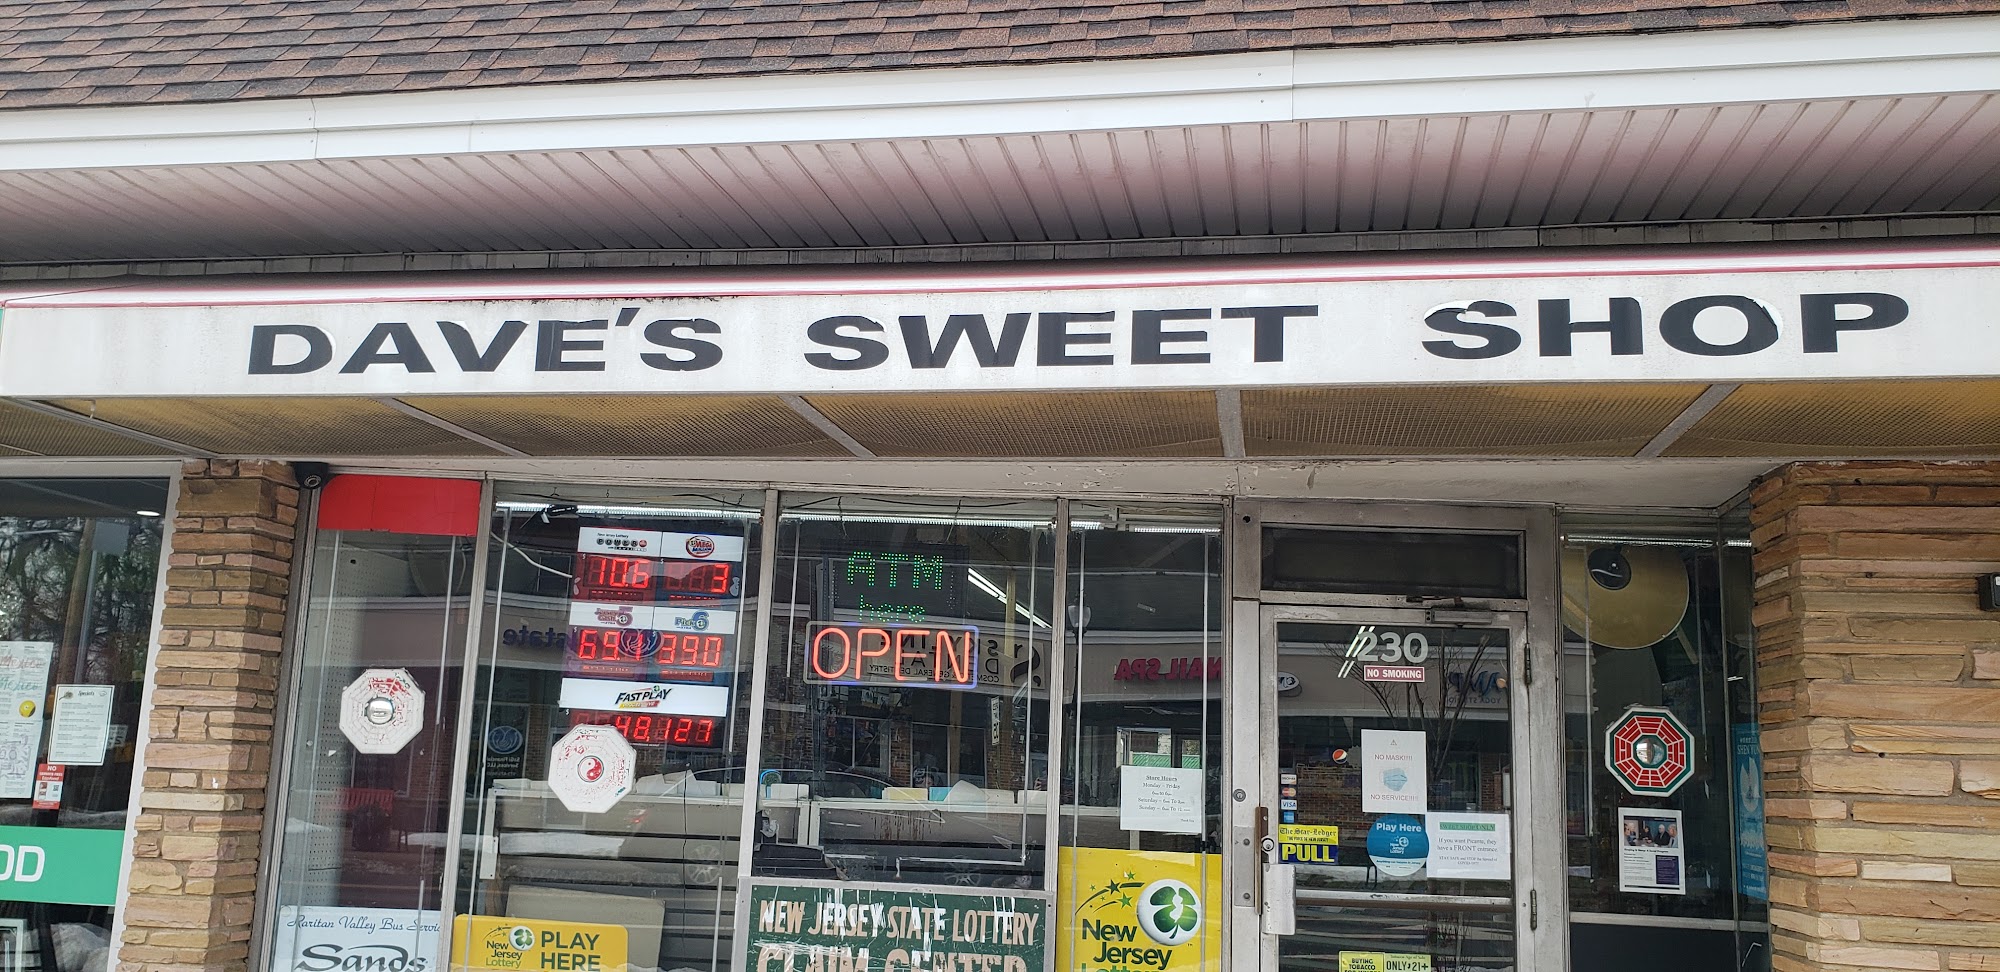 Dave's Sweet Shop